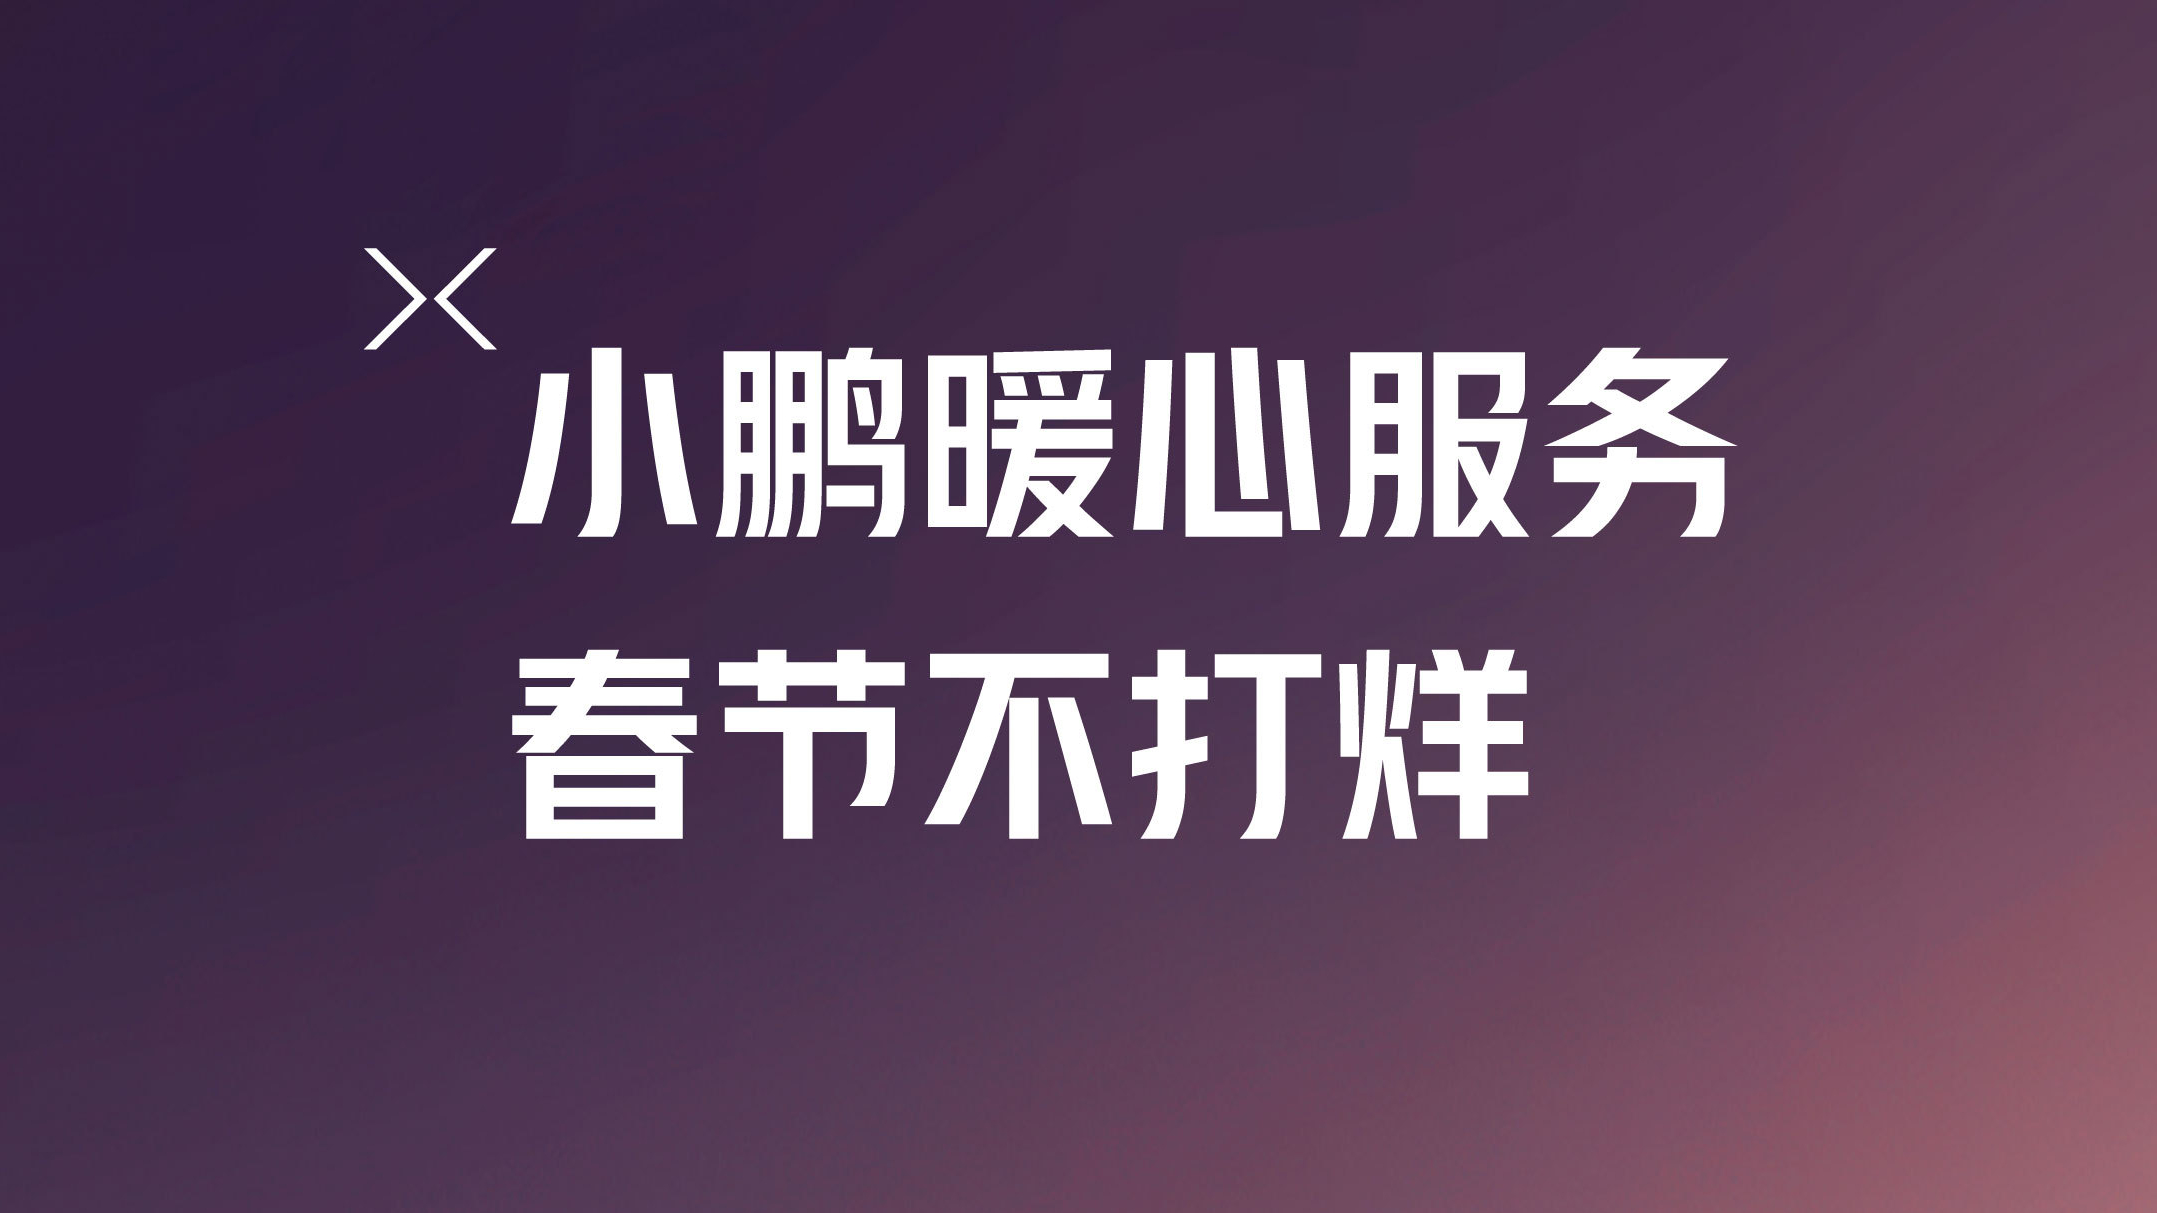 Unyielding! Xiaopeng announces "heartwarming service" for Chinese New Year.